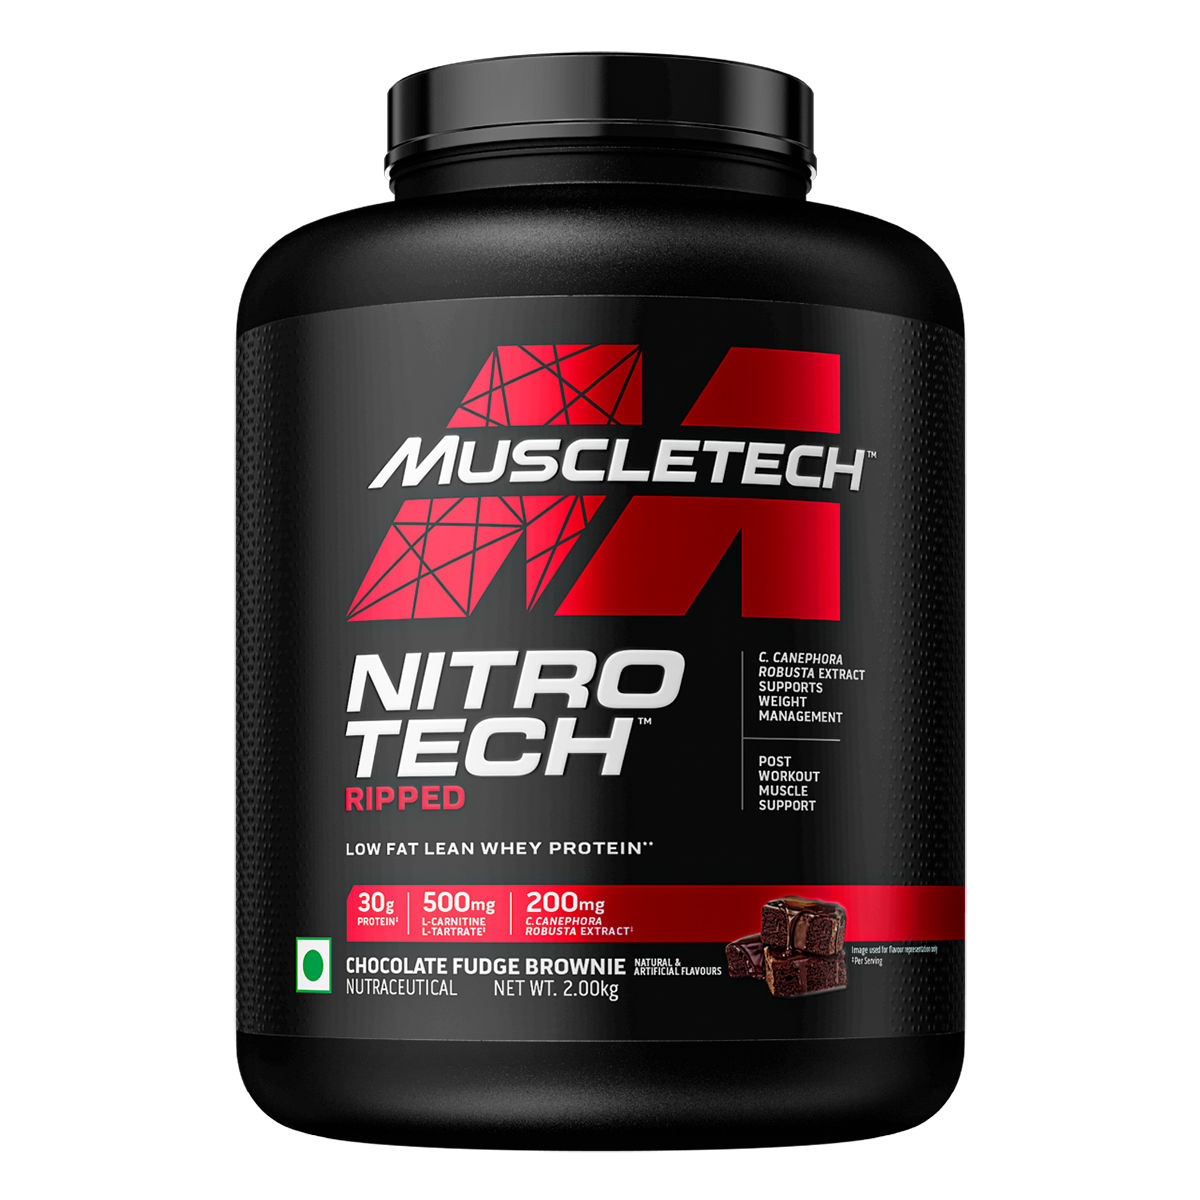 Buy Muscletech Nitrotech Ripped Low Fat Whey Protein Chocolate Fudge Brownie Flavour Powder, 2 kg Online